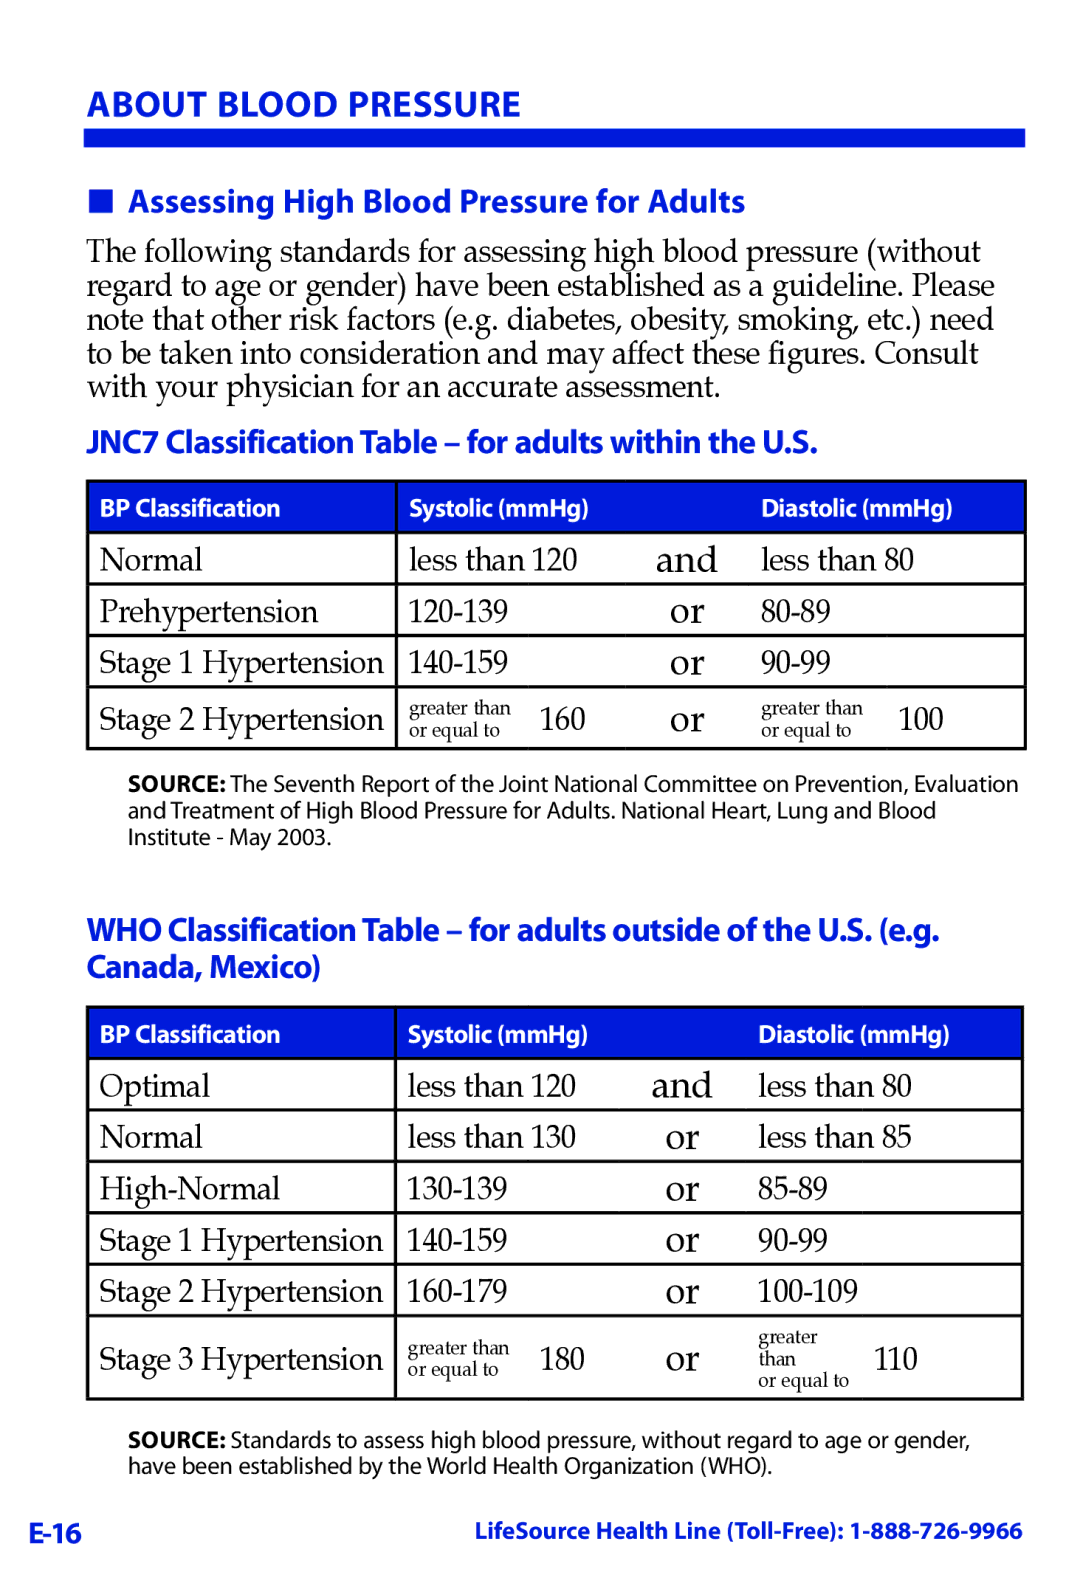 LifeSource UA-789 manual Assessing High Blood Pressure for Adults, JNC7 Classification Table for adults within the U.S 